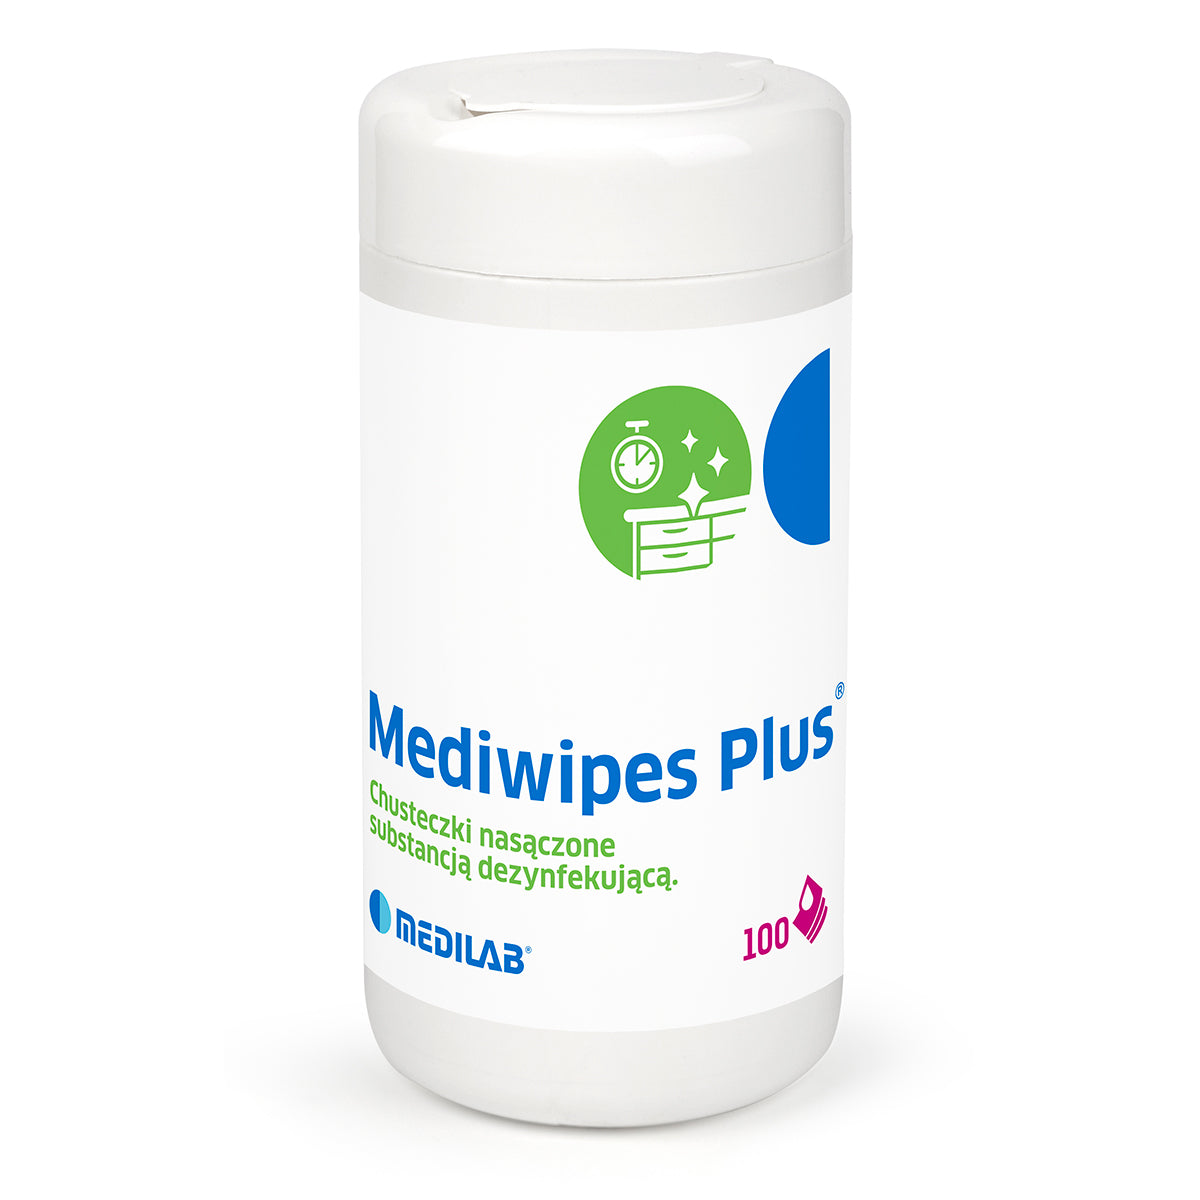 Mediwipes plus alcohol wipes for surface disinfection